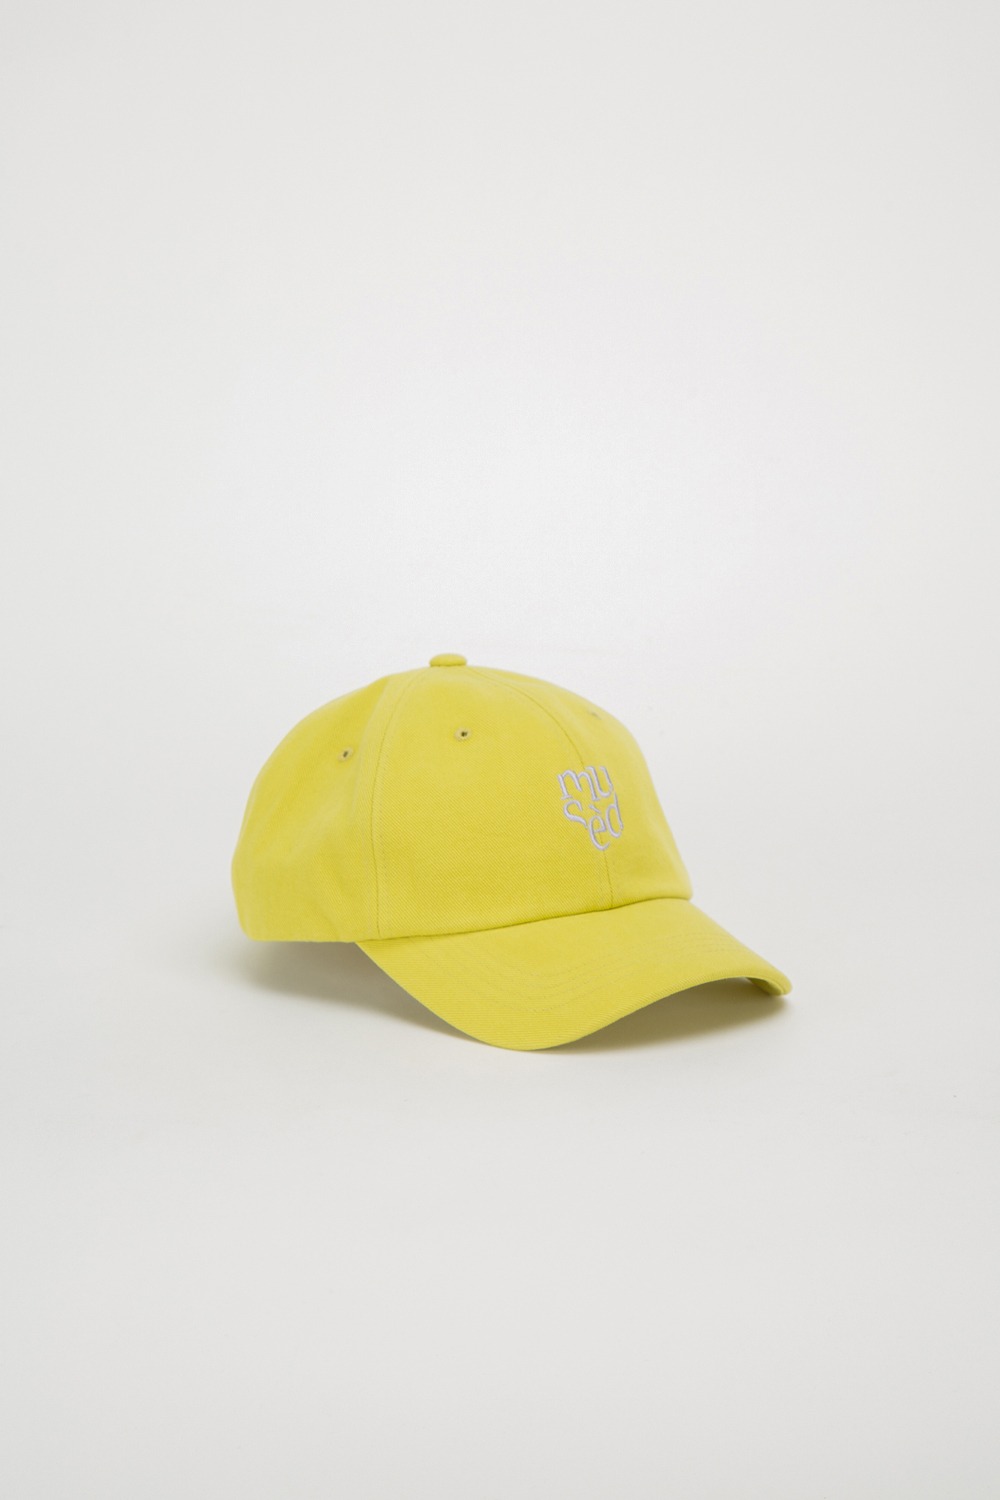 MUSED LOGO BALL CAP - LIME